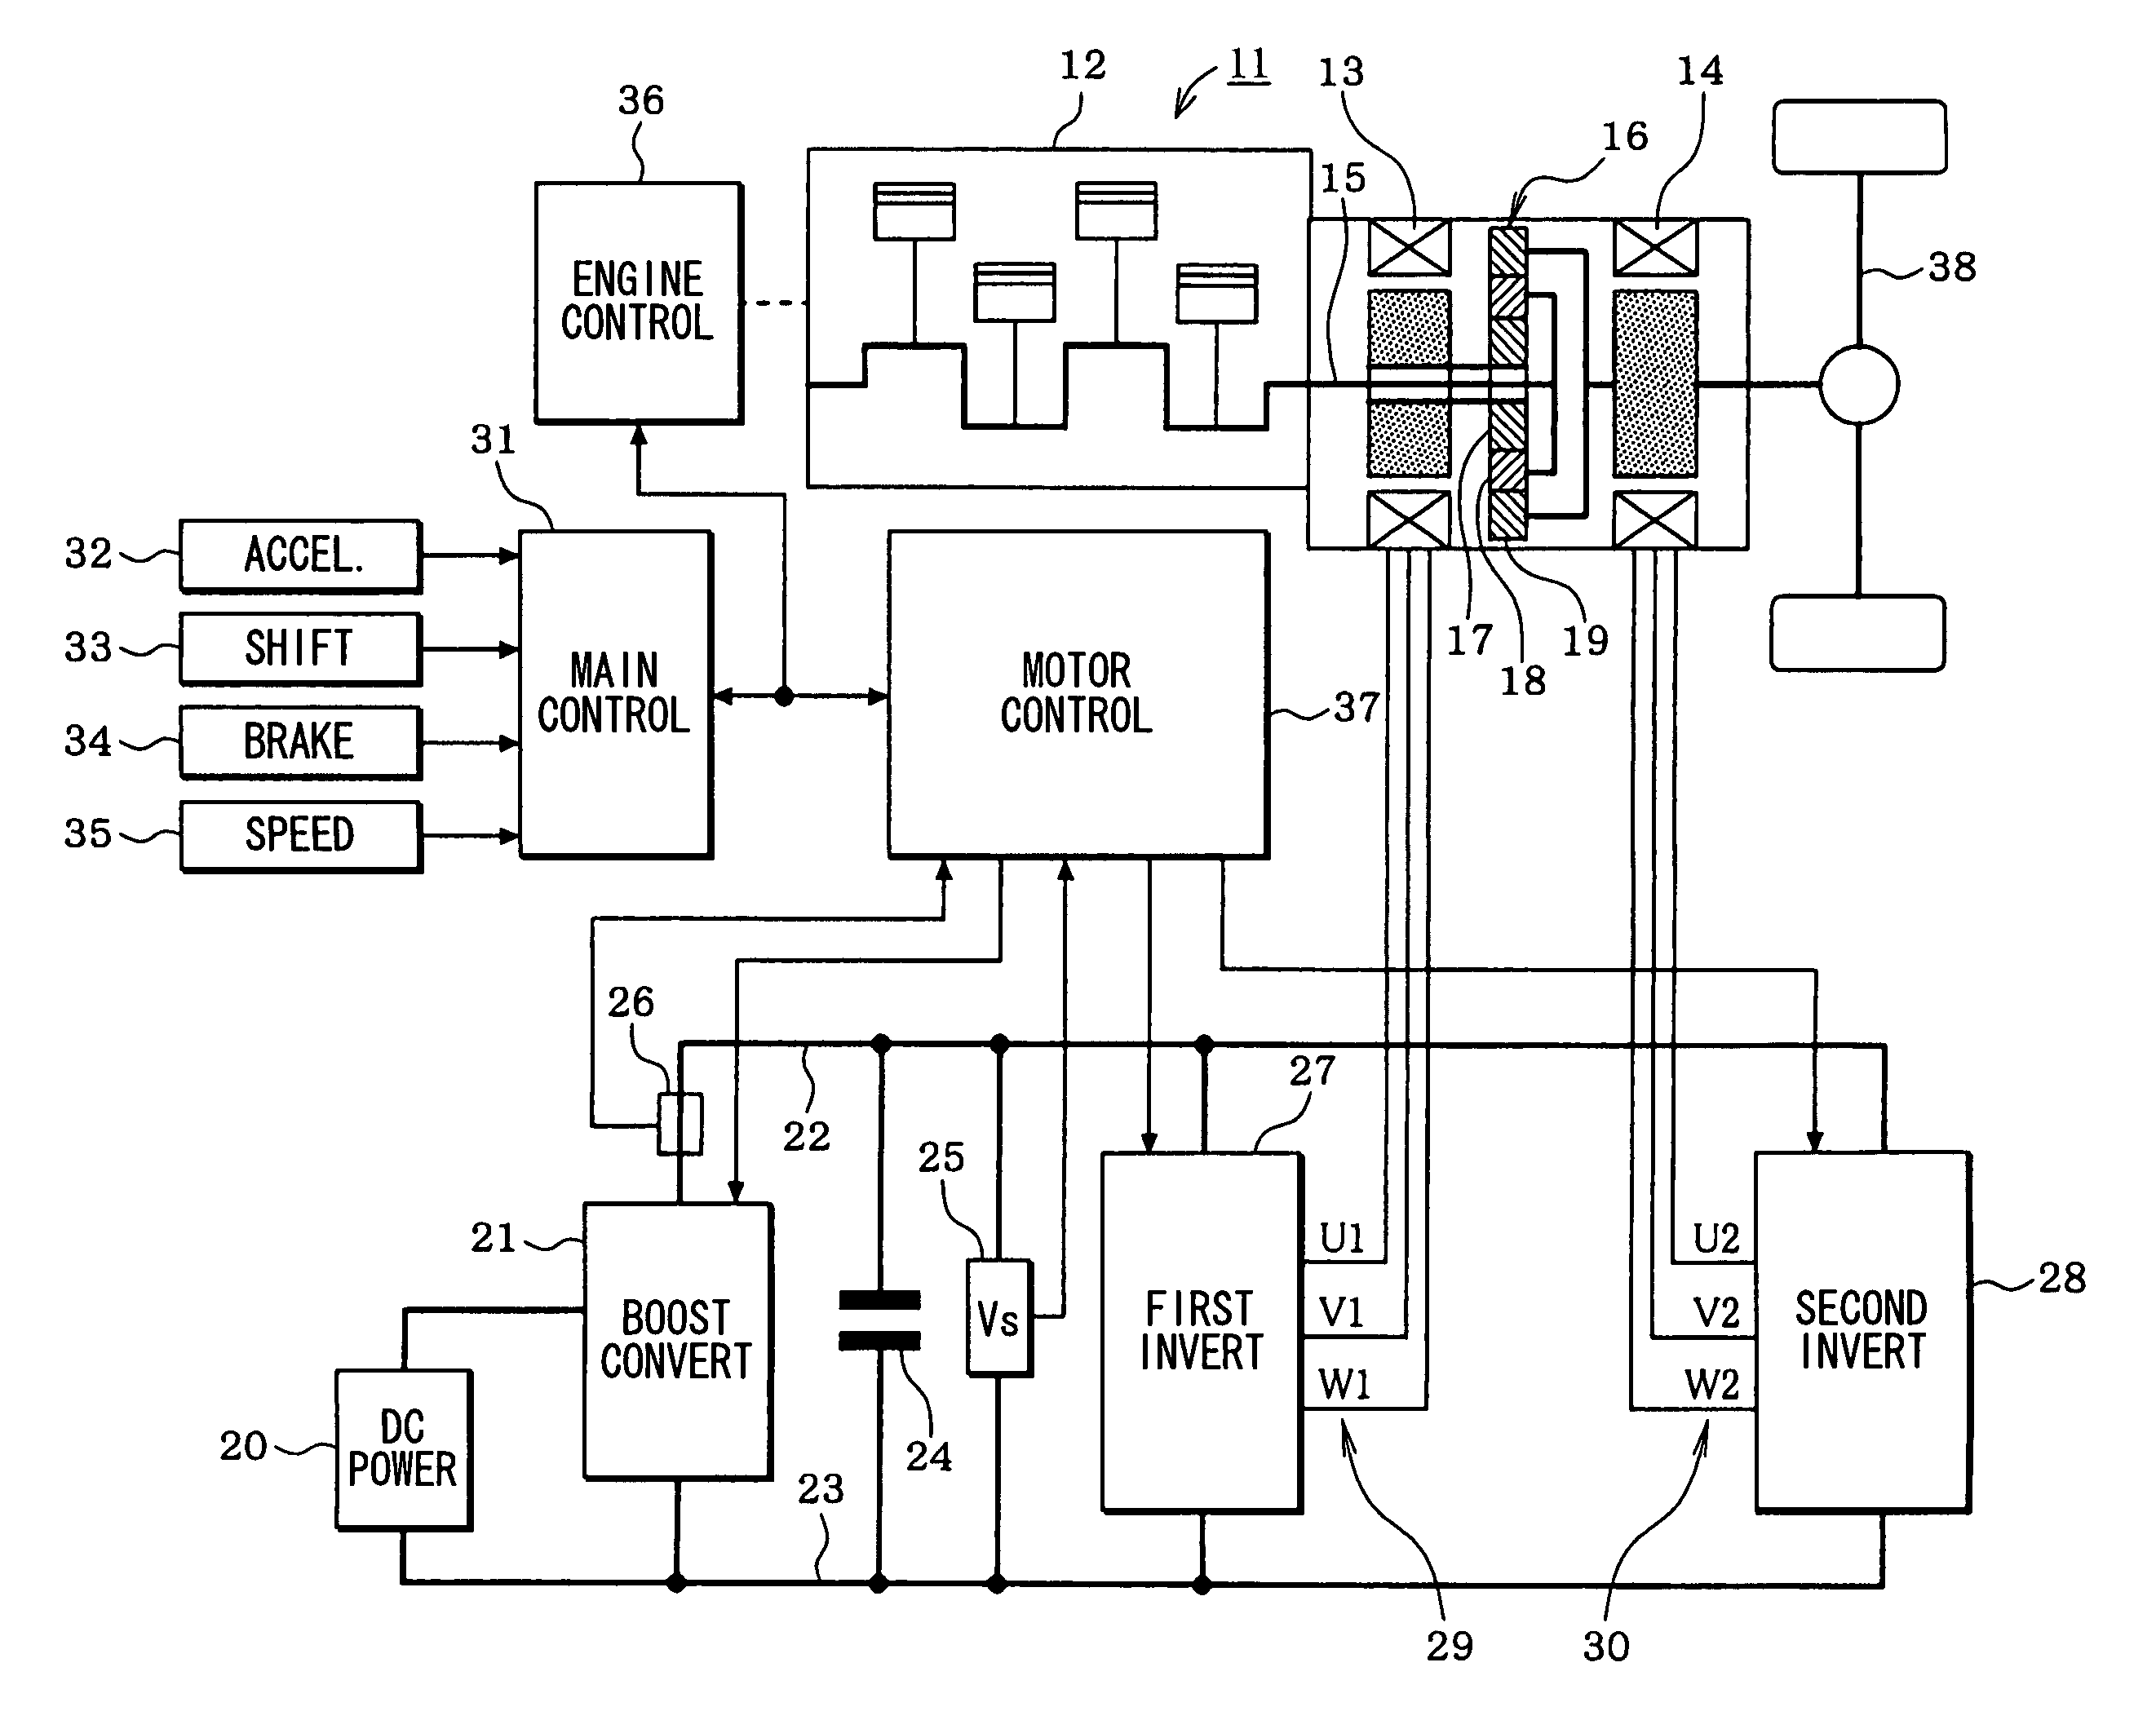 Control apparatus for electric vehicles